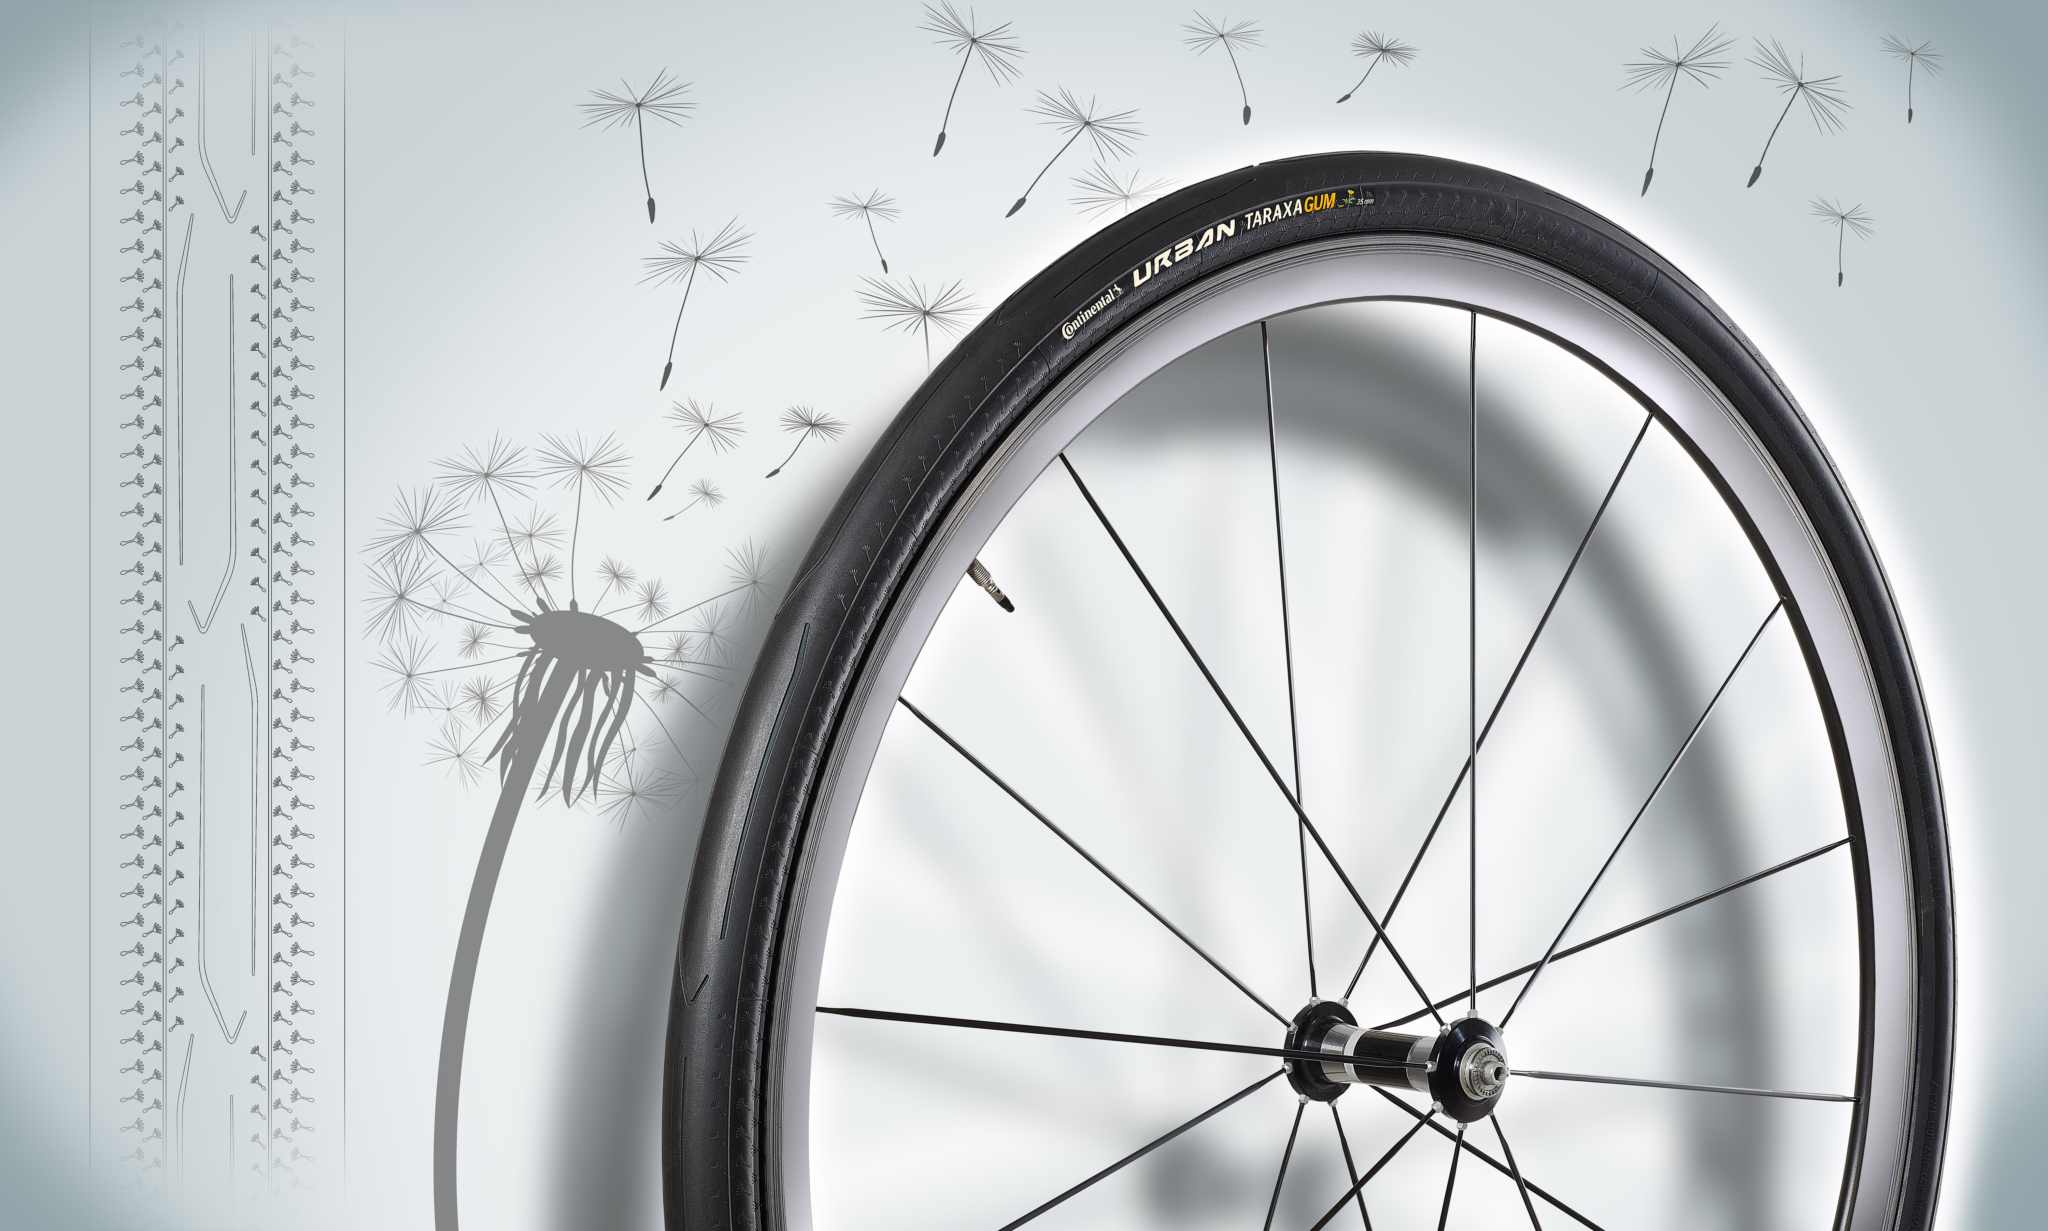 Two awards for Continental dandelion rubber bicycle tyres